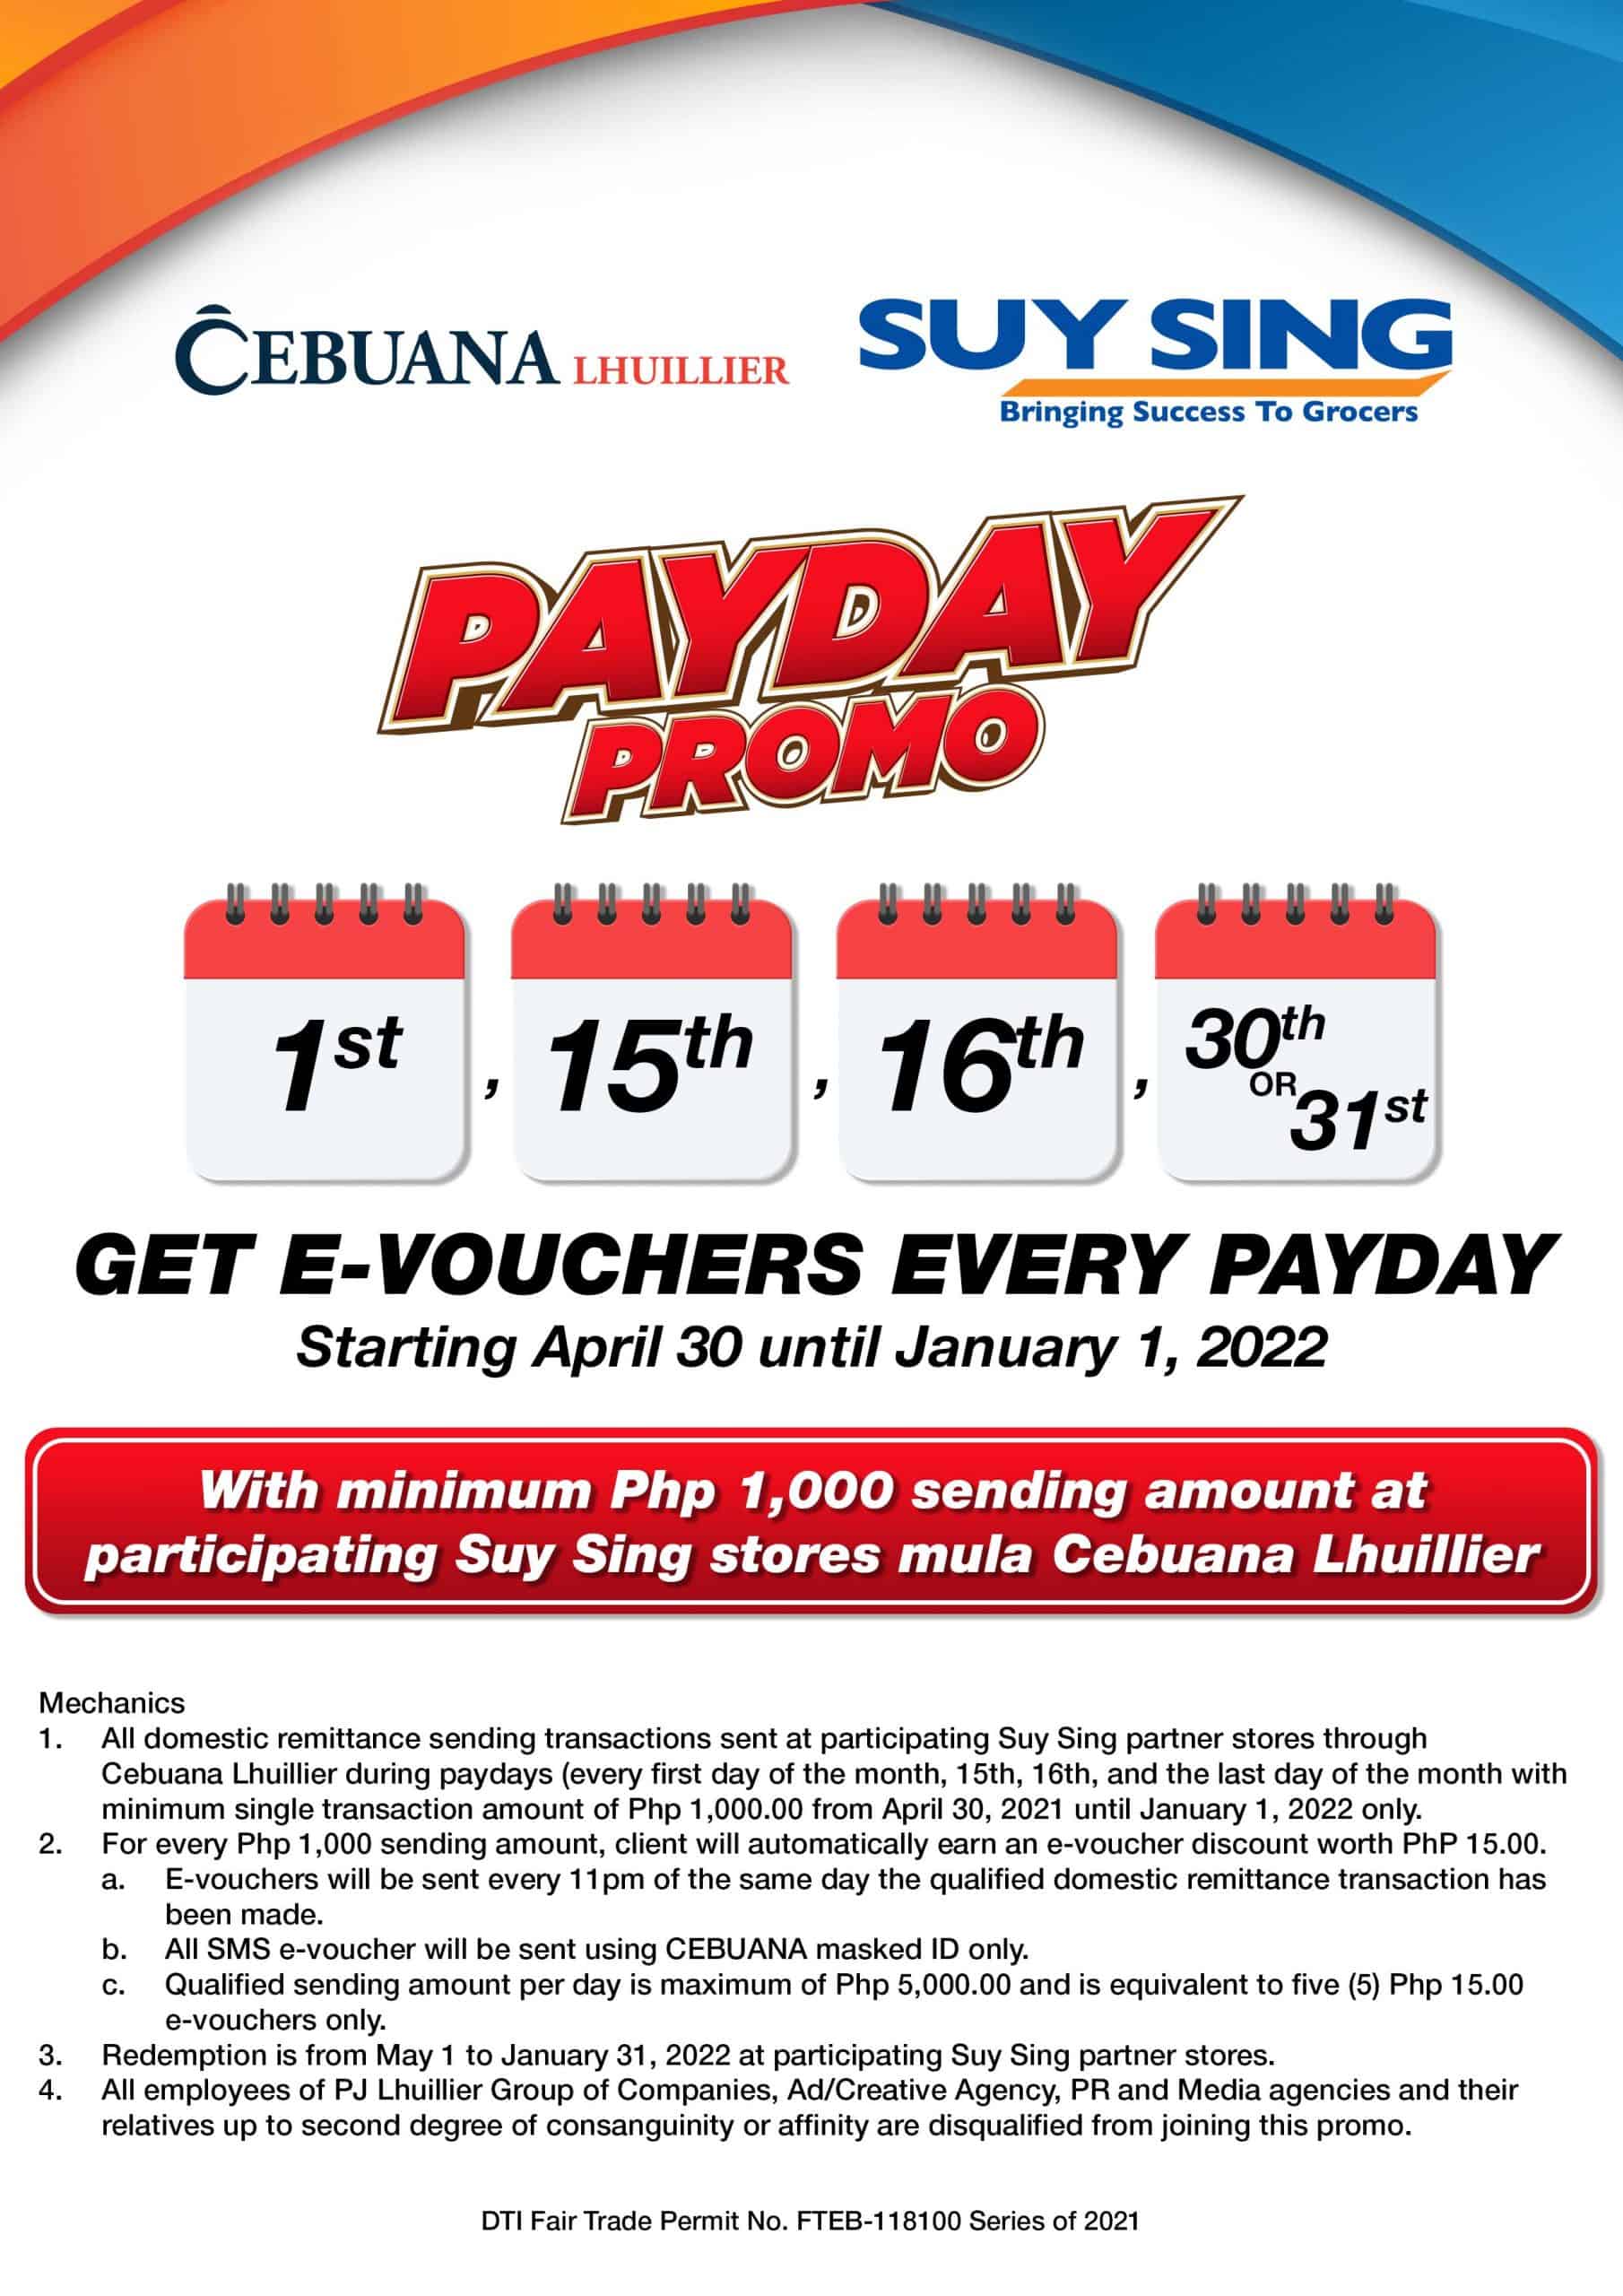 Suy Sing PayDay Promo 2021